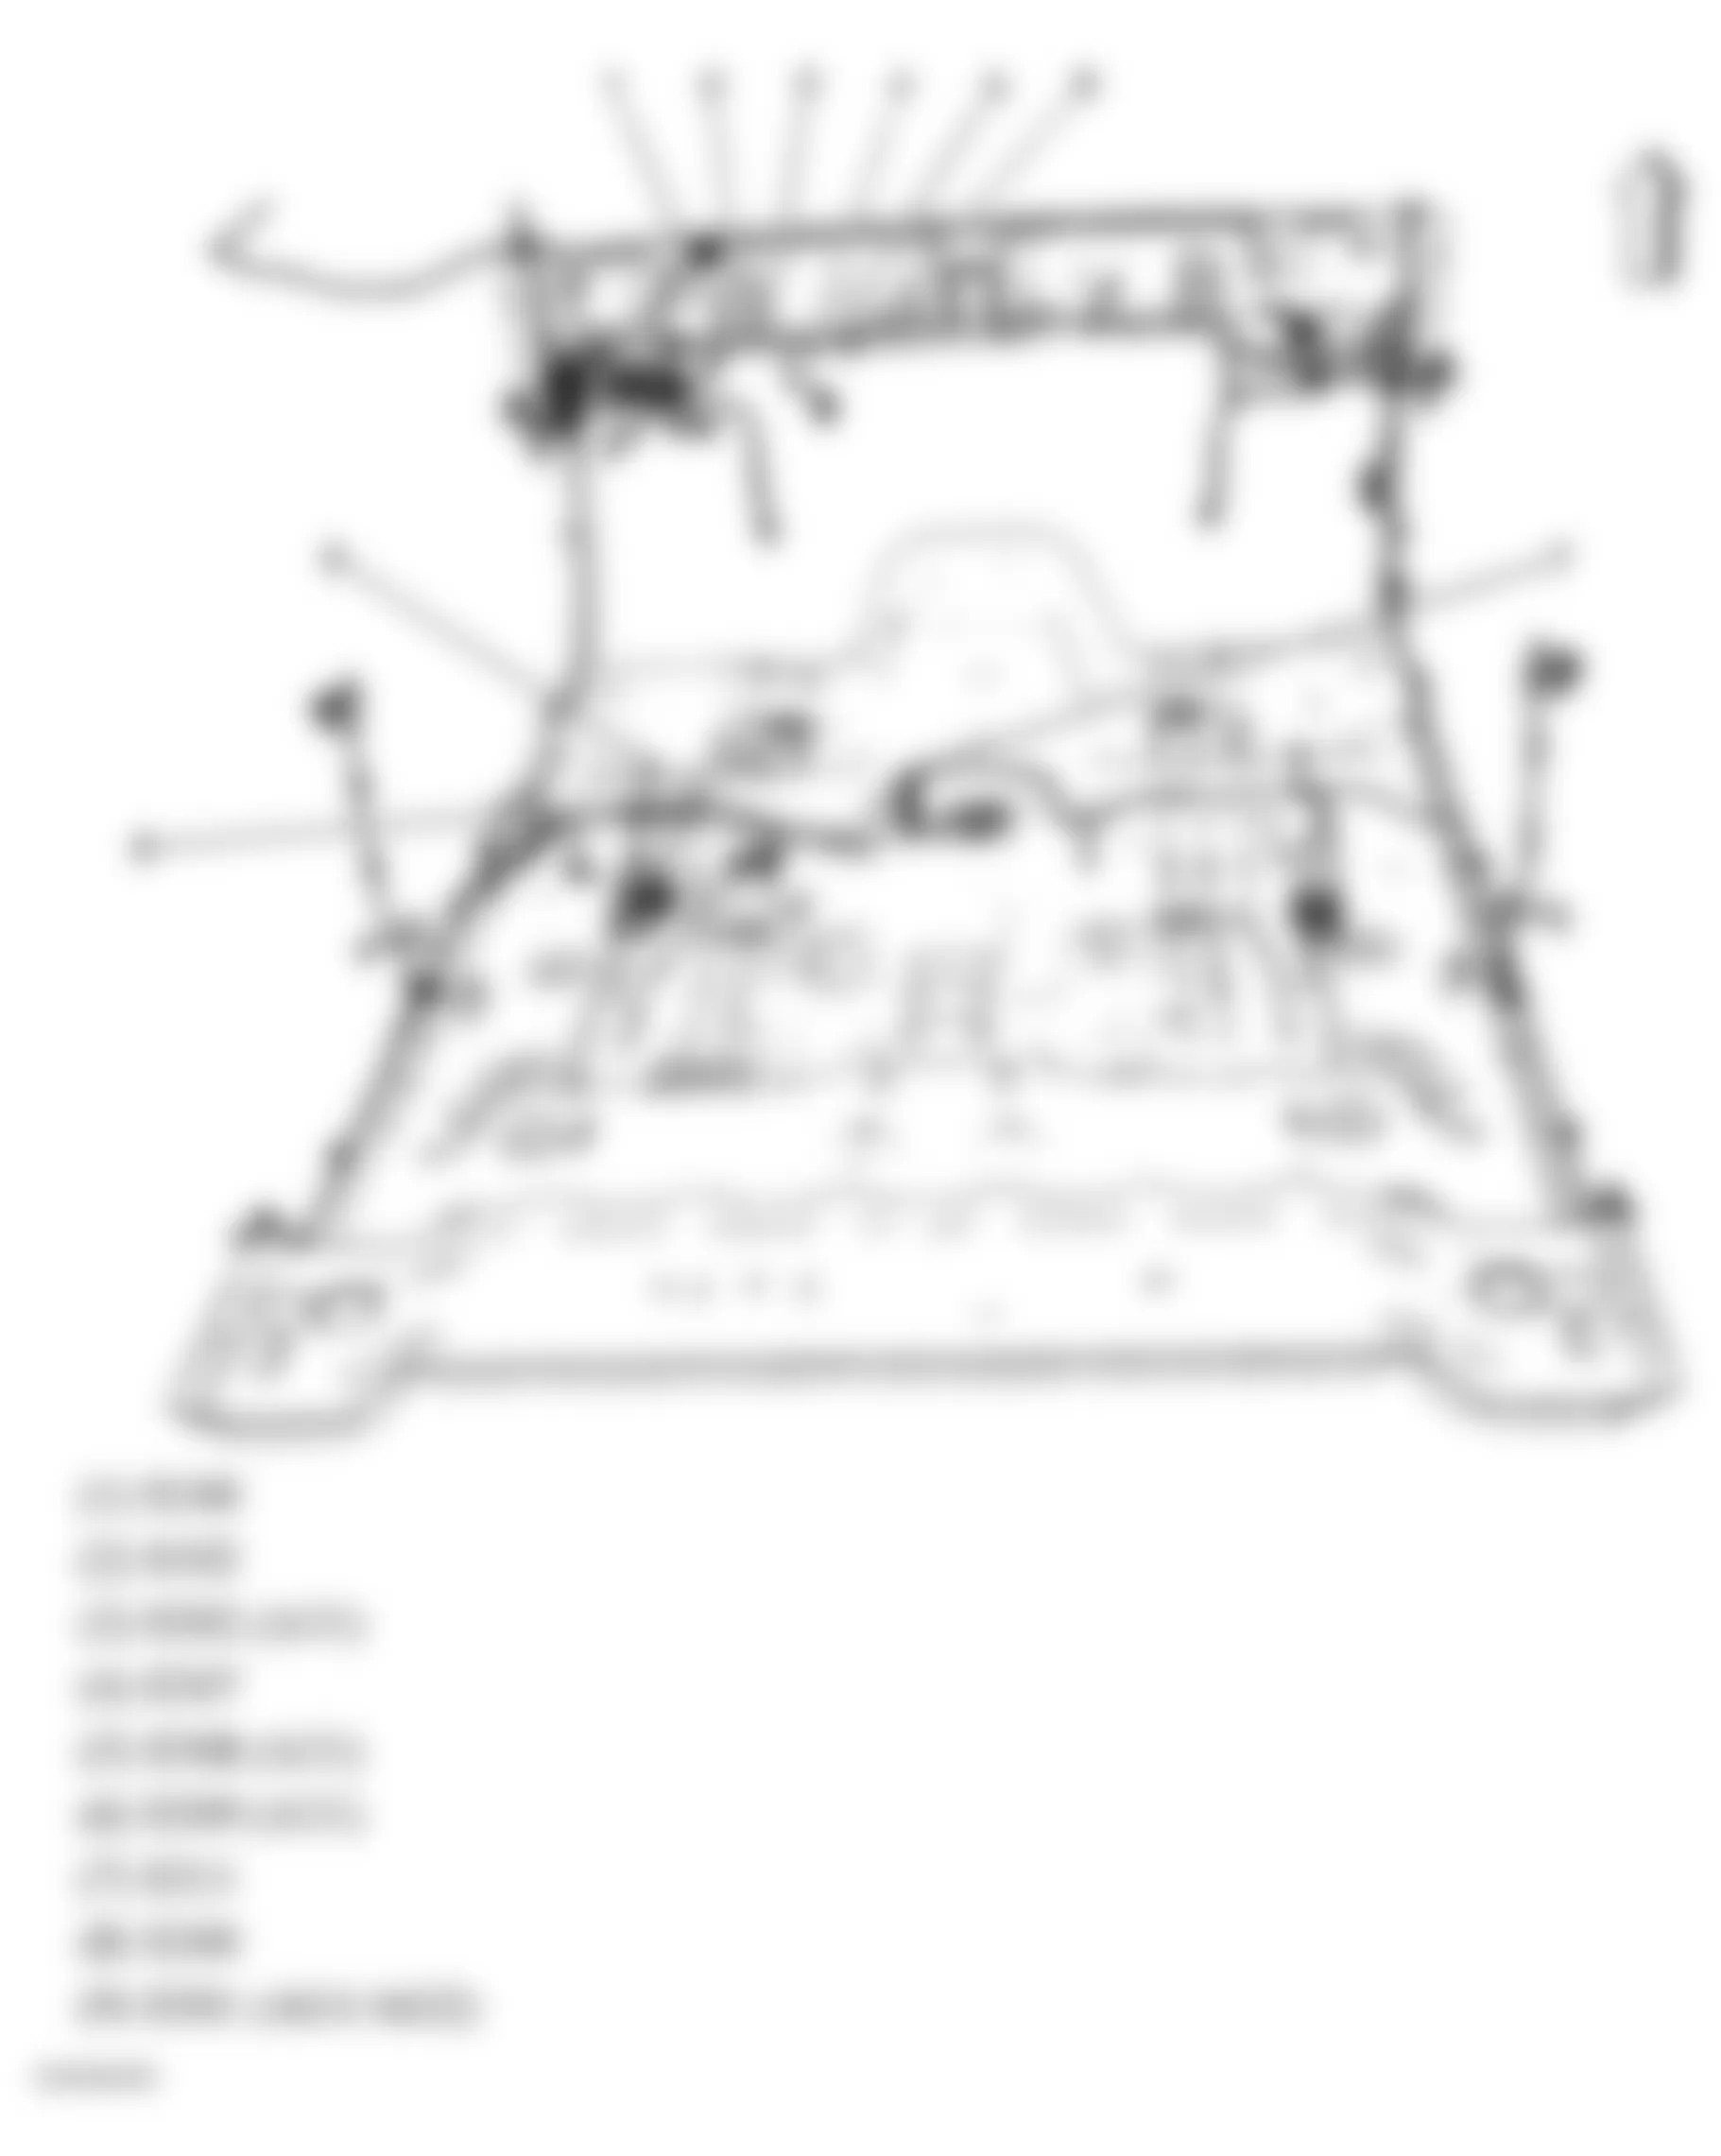 Chevrolet Colorado 2005 - Component Locations -  Body Harness Routing